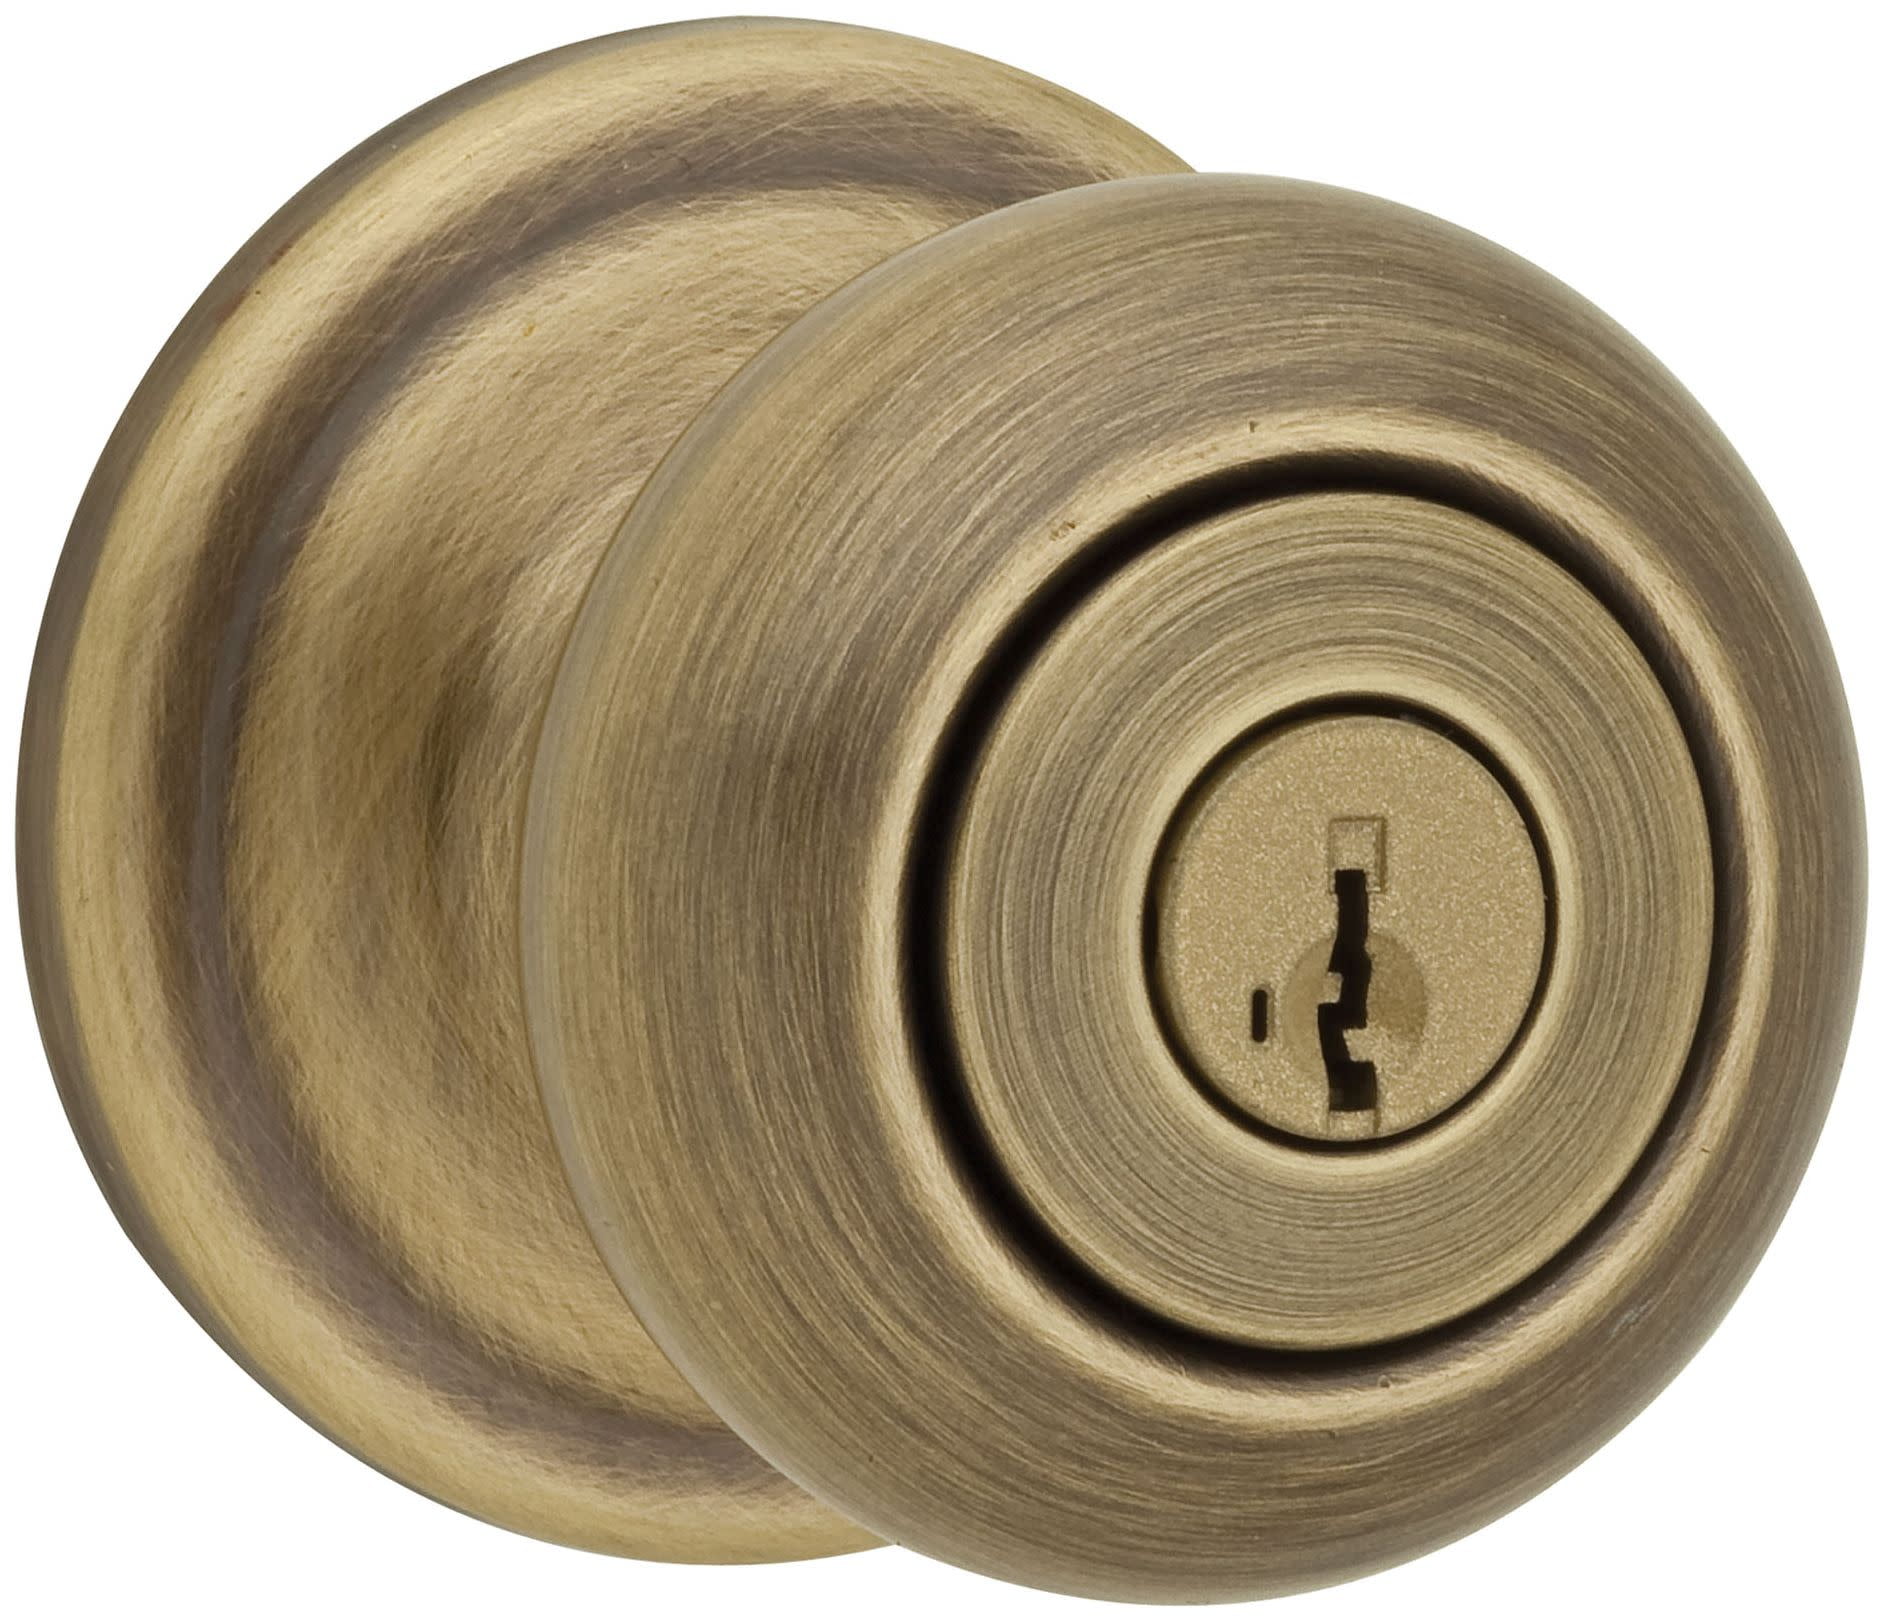 Kwikset Juno Entry Knob featuring SmartKey in Polished Brass Free Shipping 